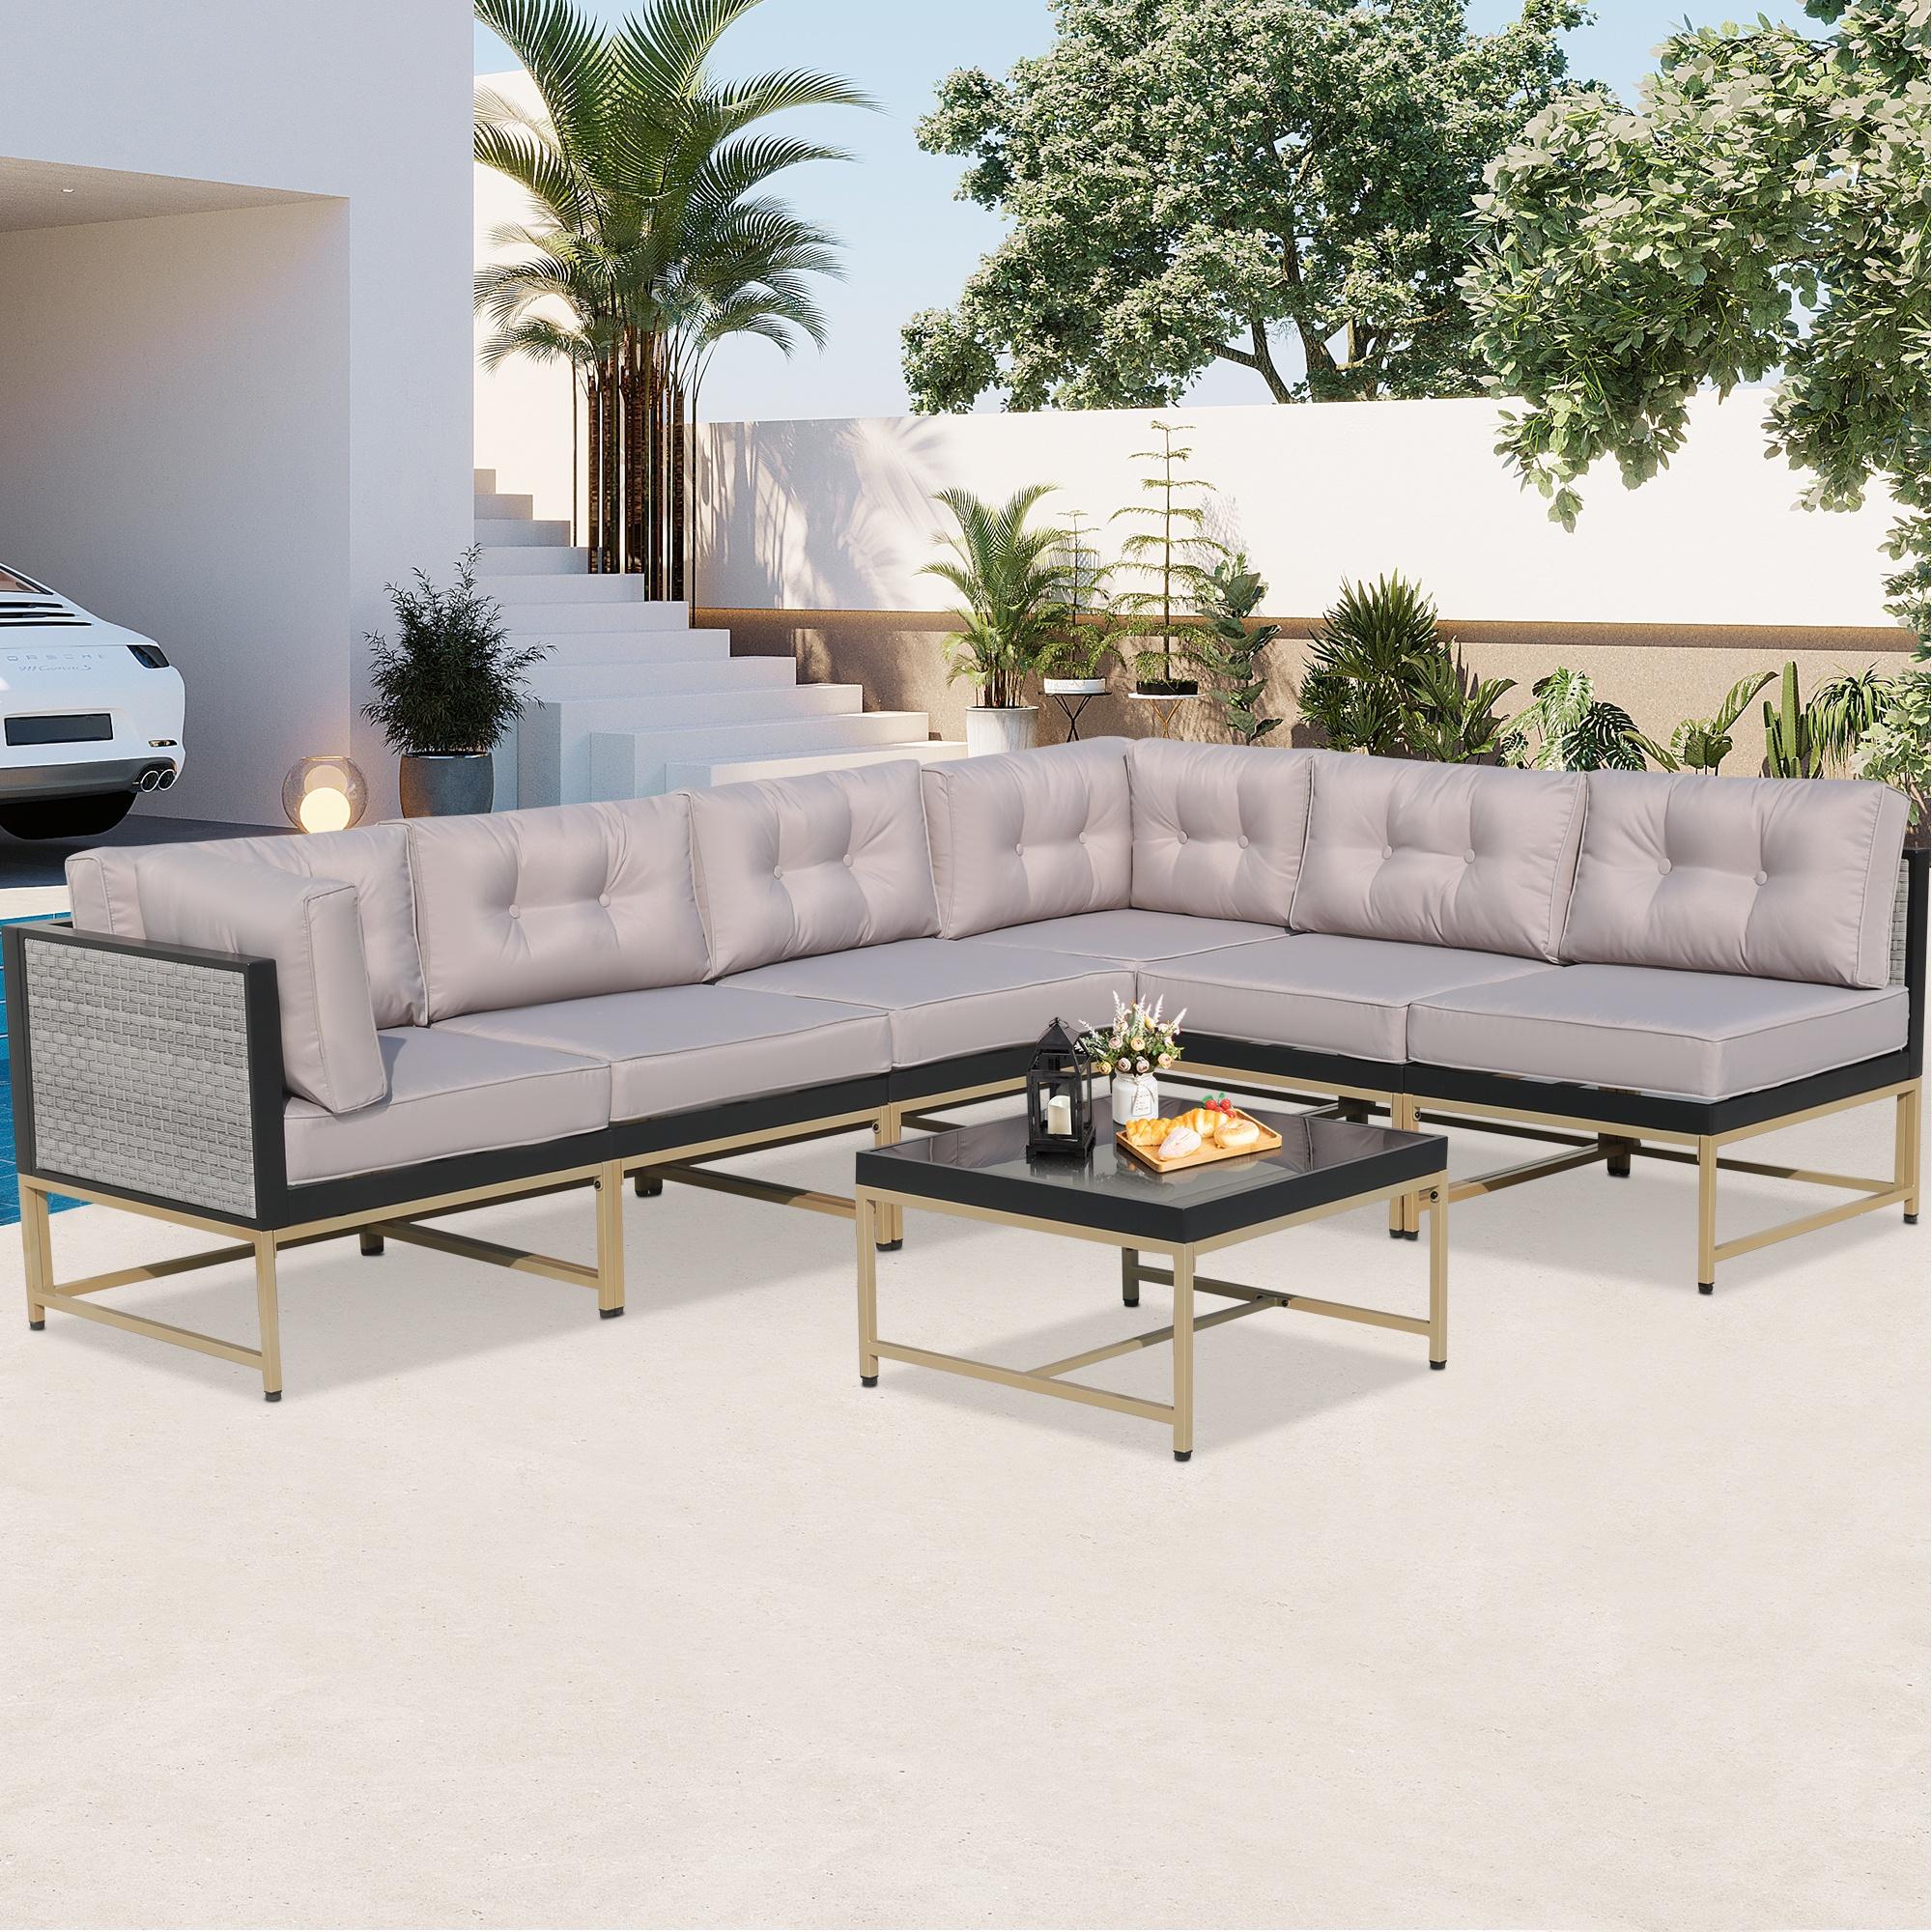 Patio Outdoor Furniture Sets, 7 Pieces All-Weather Rattan Sectional Sofa with Tea Table and Cushions, PE Rattan Wicker Sofa Couch Conversation Set for Garden Backyard Poolside - image 2 of 11